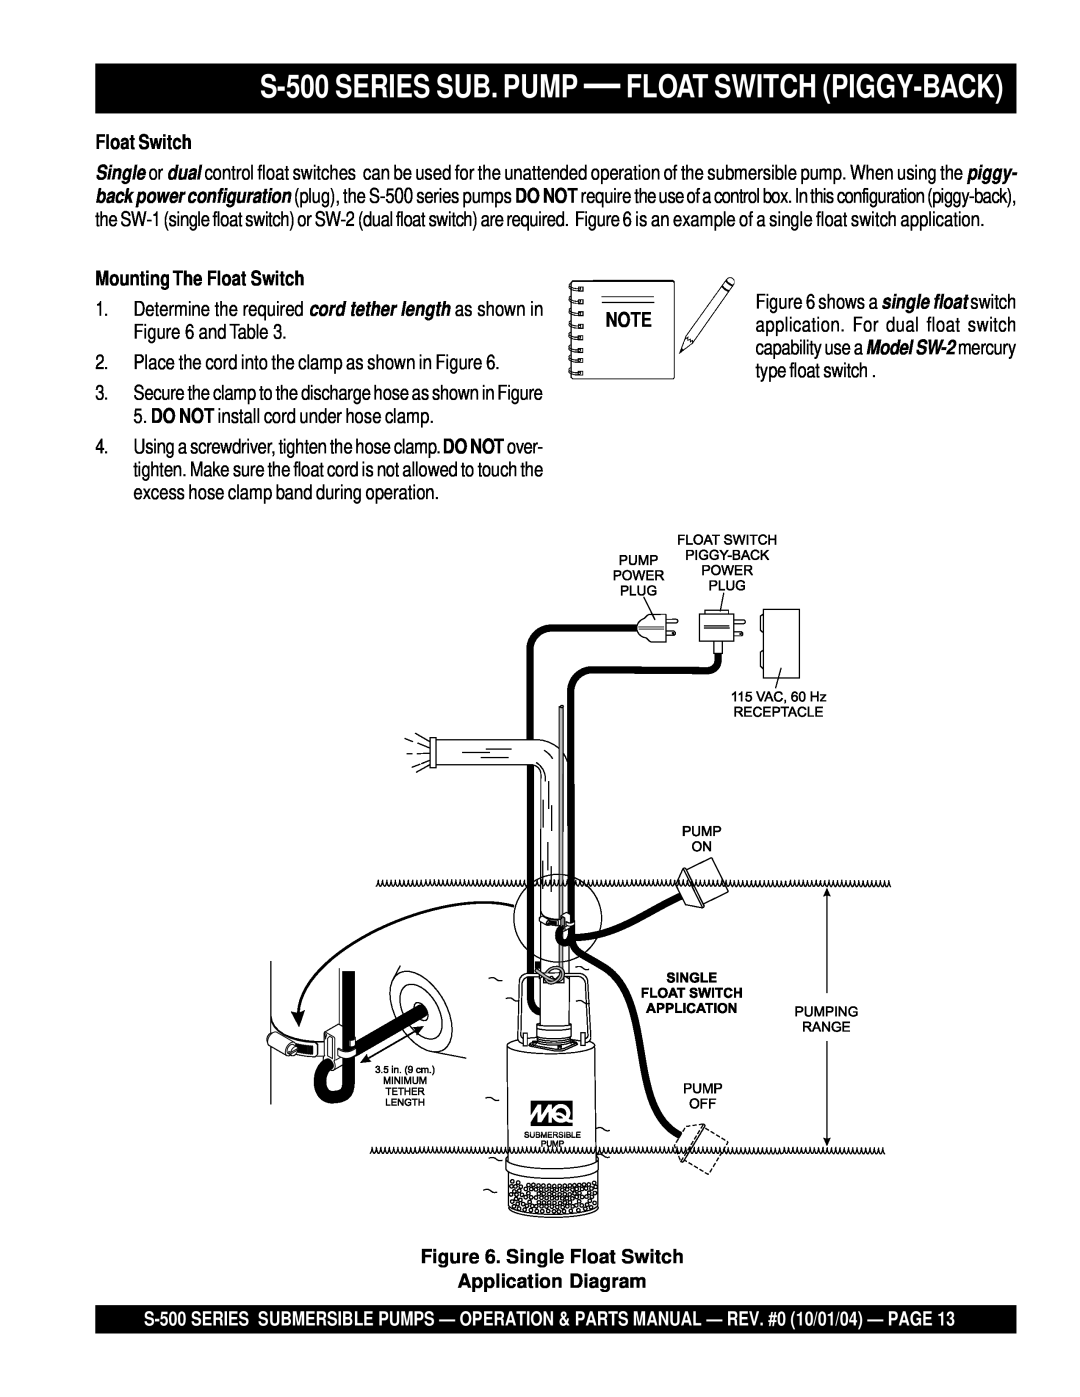 Multiquip manual S-500SERIES SUB. PUMP - FLOAT SWITCH PIGGY-BACK, Mounting The Float Switch 